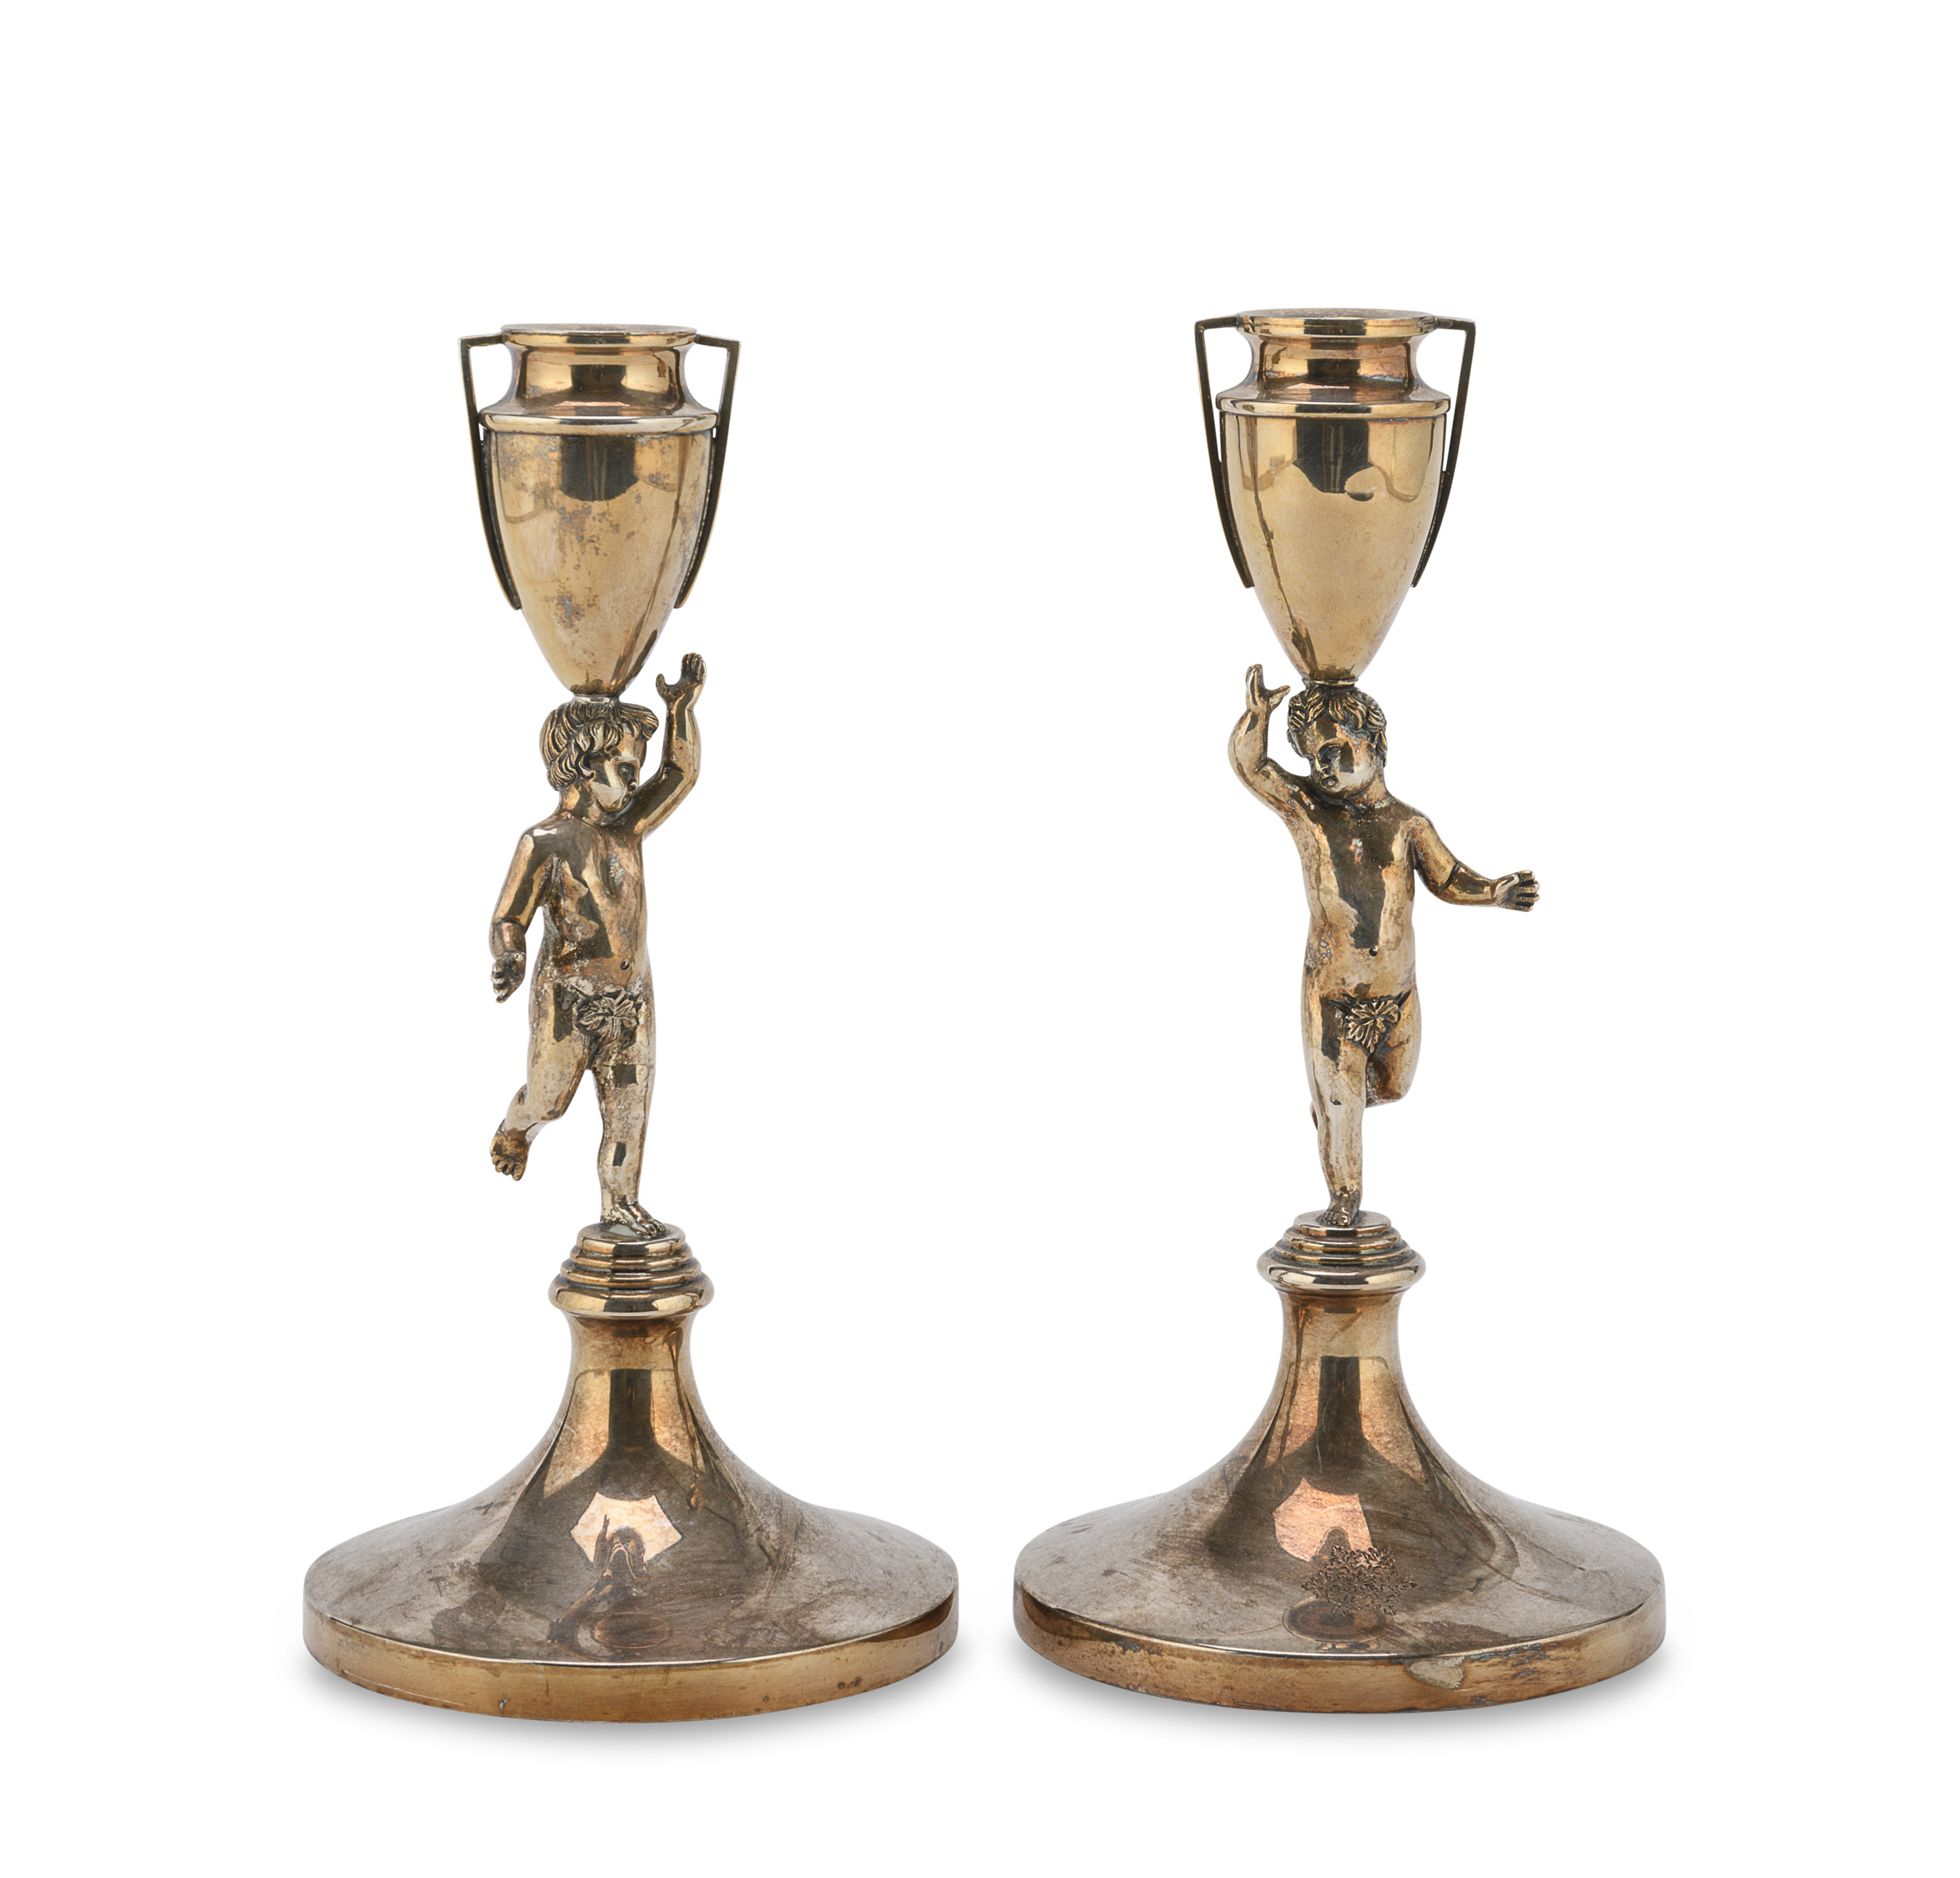 PAIR OF GILT SILVER CANDLESTICKS FLORENCE 2000